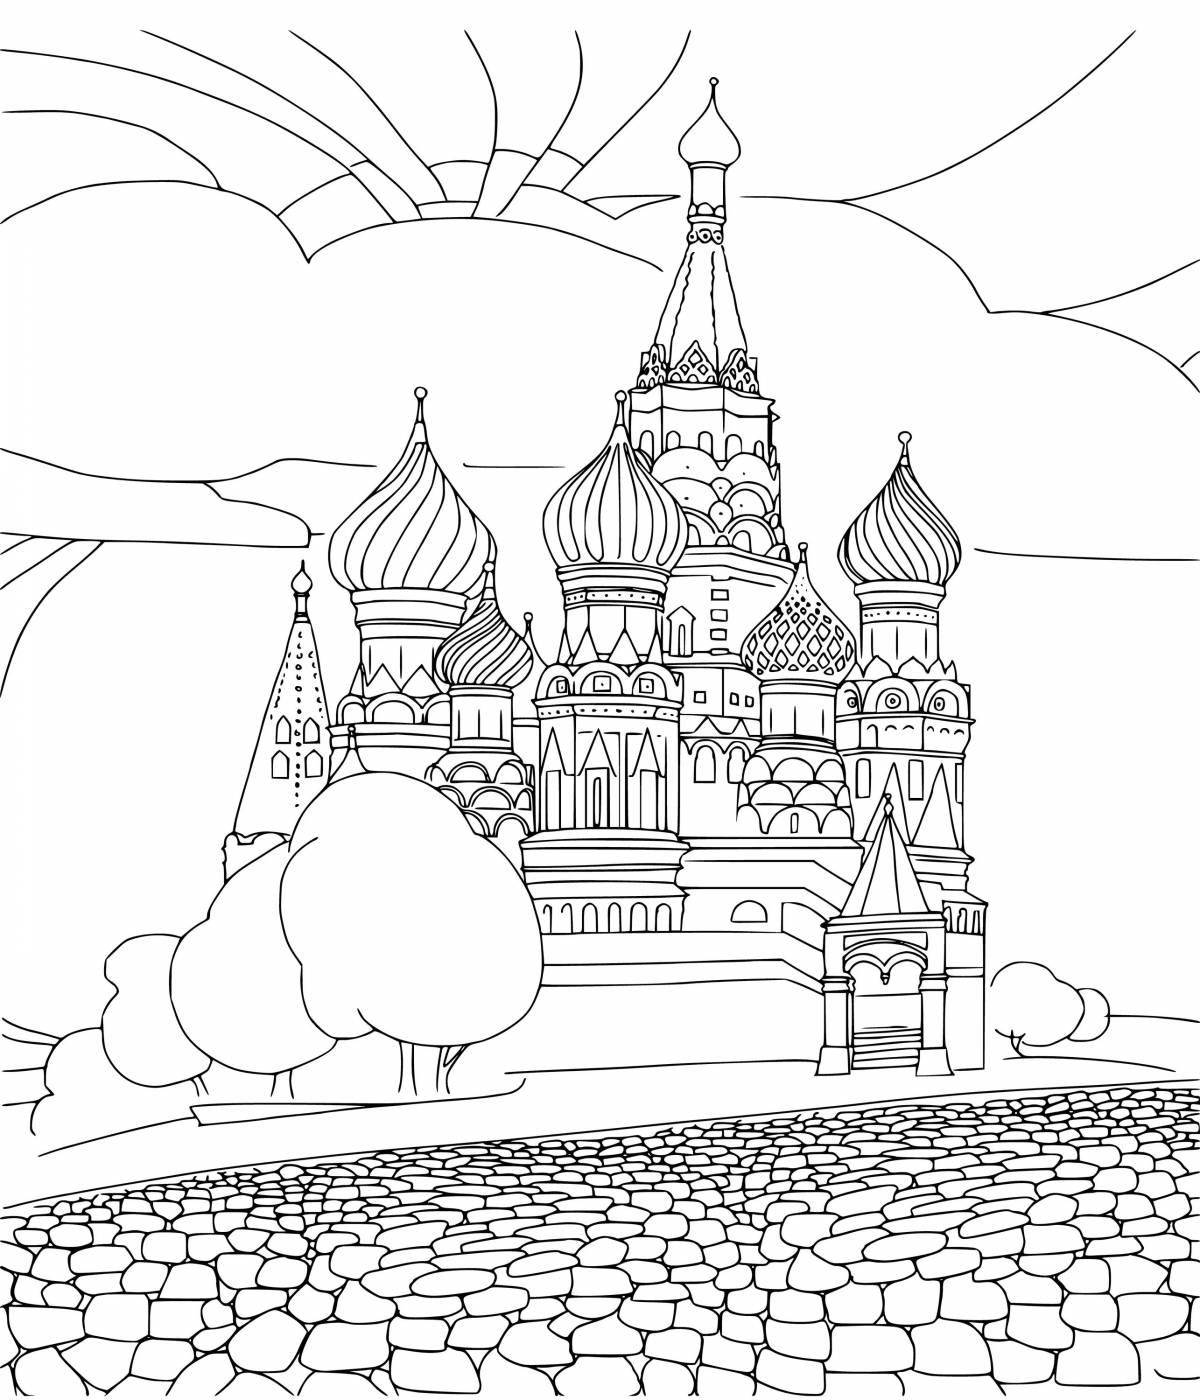 Picturesque moscow grade 1 coloring